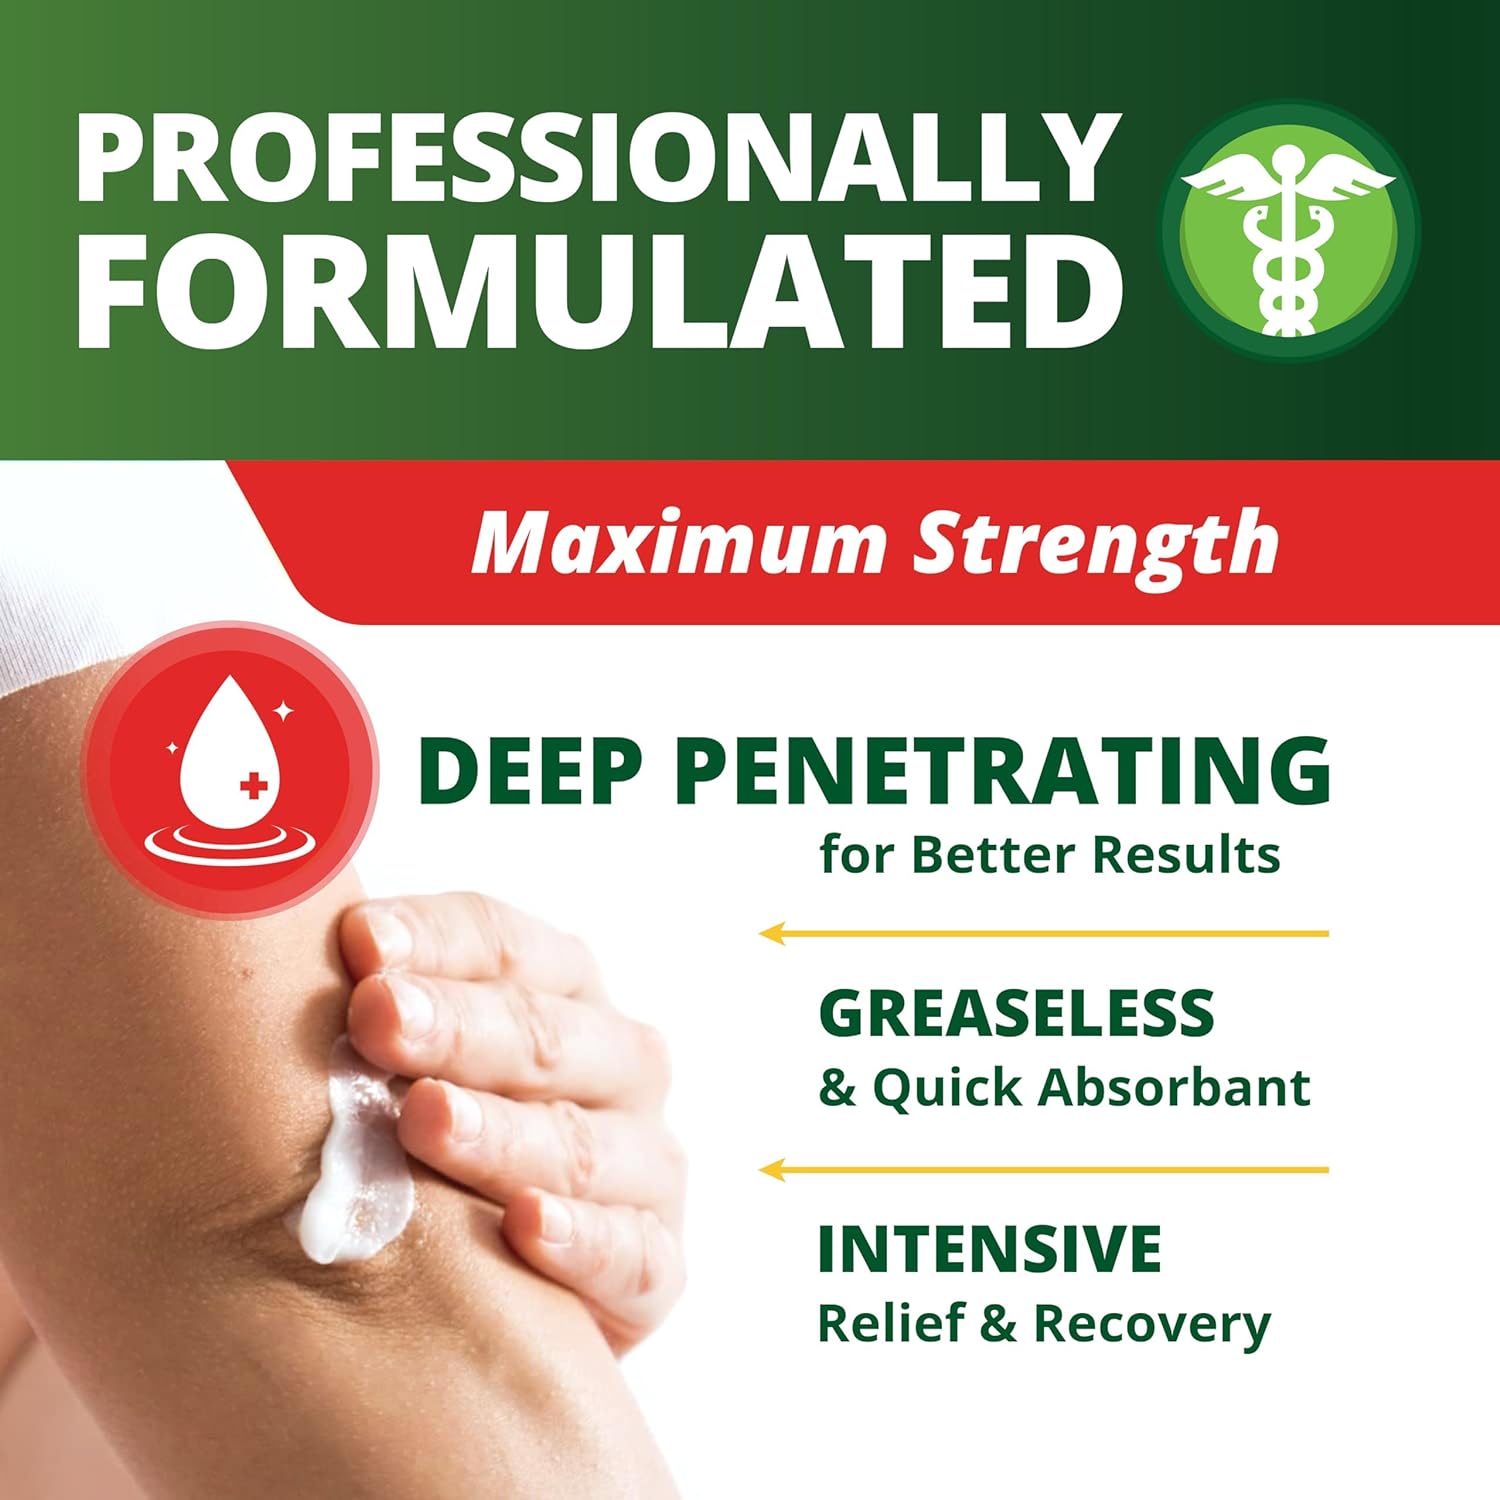 Owell Naturals Arthritis Pain Relief Cream 3.5 oz, Maximum Strength Deep Penetrating Relieving for Aches, Neuropathy, Joint, Muscle, Back, Knee, Feet, Hand, Ankle, Restless Legs, Shoulder. : Health & Household